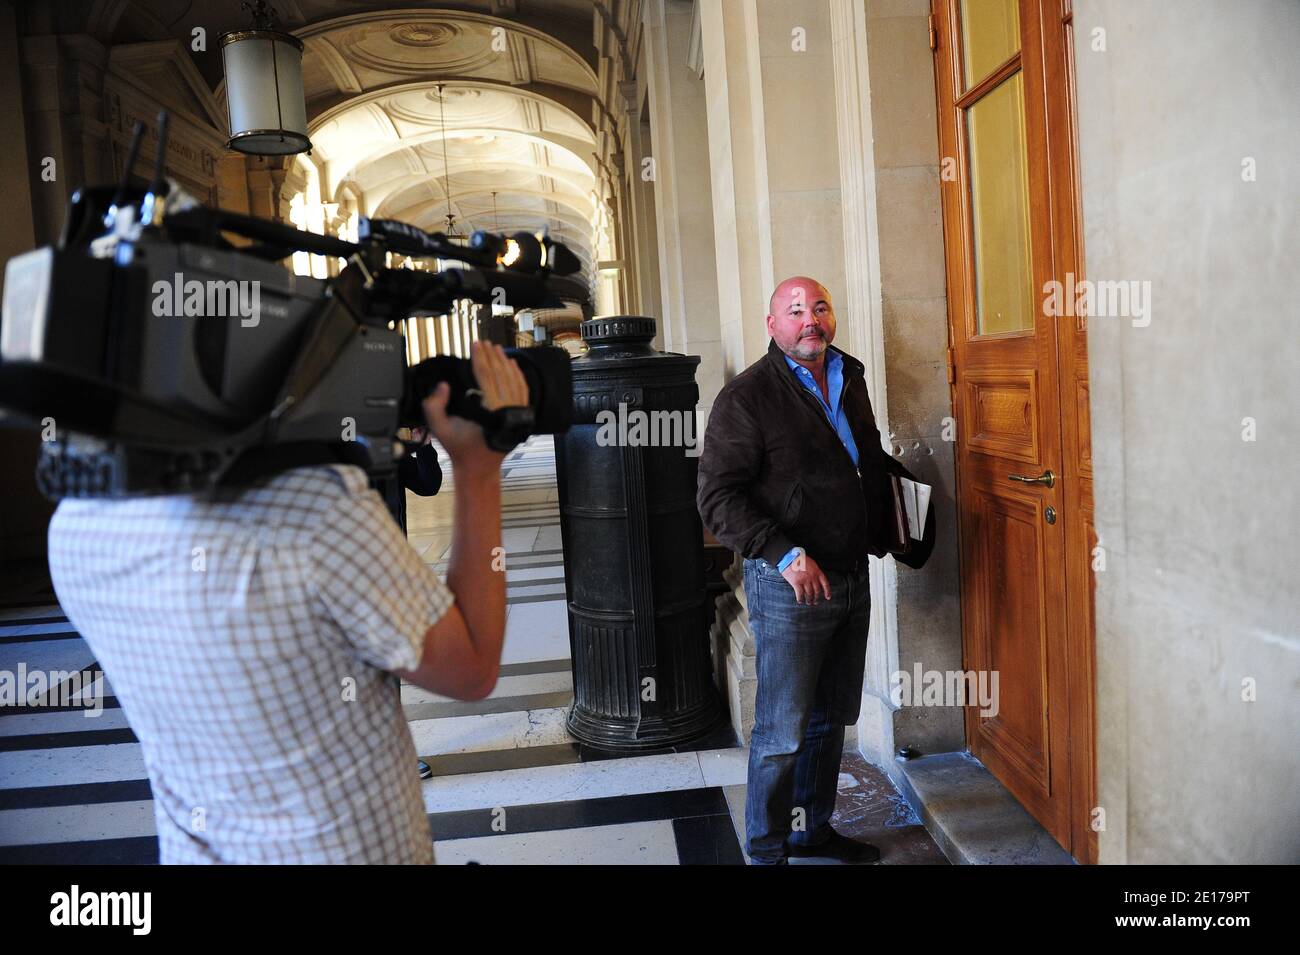 Yvan Colonna's lawyer Pascal Garbarini arrives at Paris court hall in Paris, France on May 30, 2011 during Yvan Colonna's appeal trial for the murder in 1998 of Claude Erignac, France's top state official on the Mediterranean island of Corsica. Photo by Mousse/ABACAPRESS.COM Stock Photo